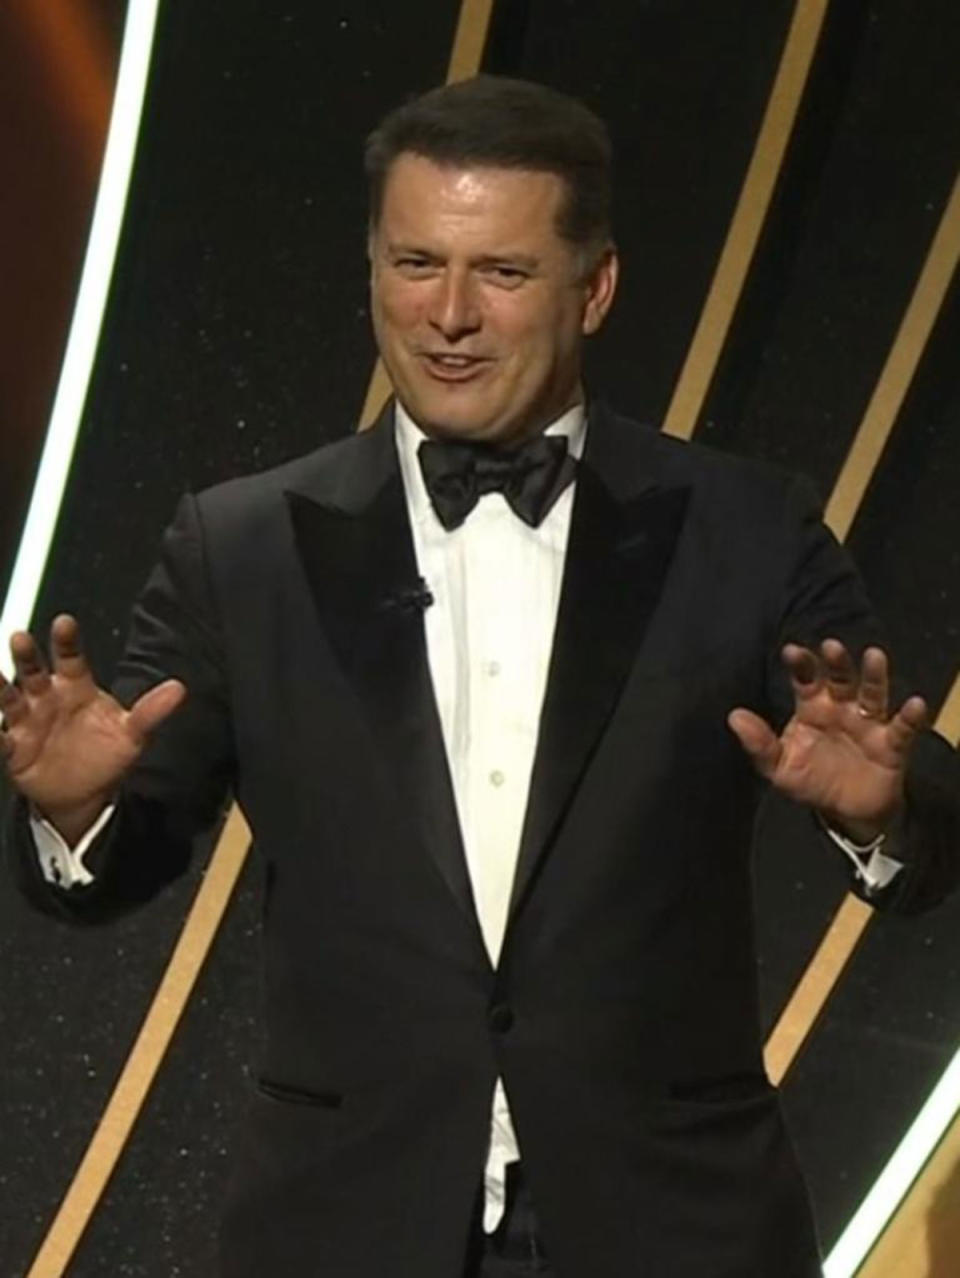 Karl Stefanovic on stage at the Logies